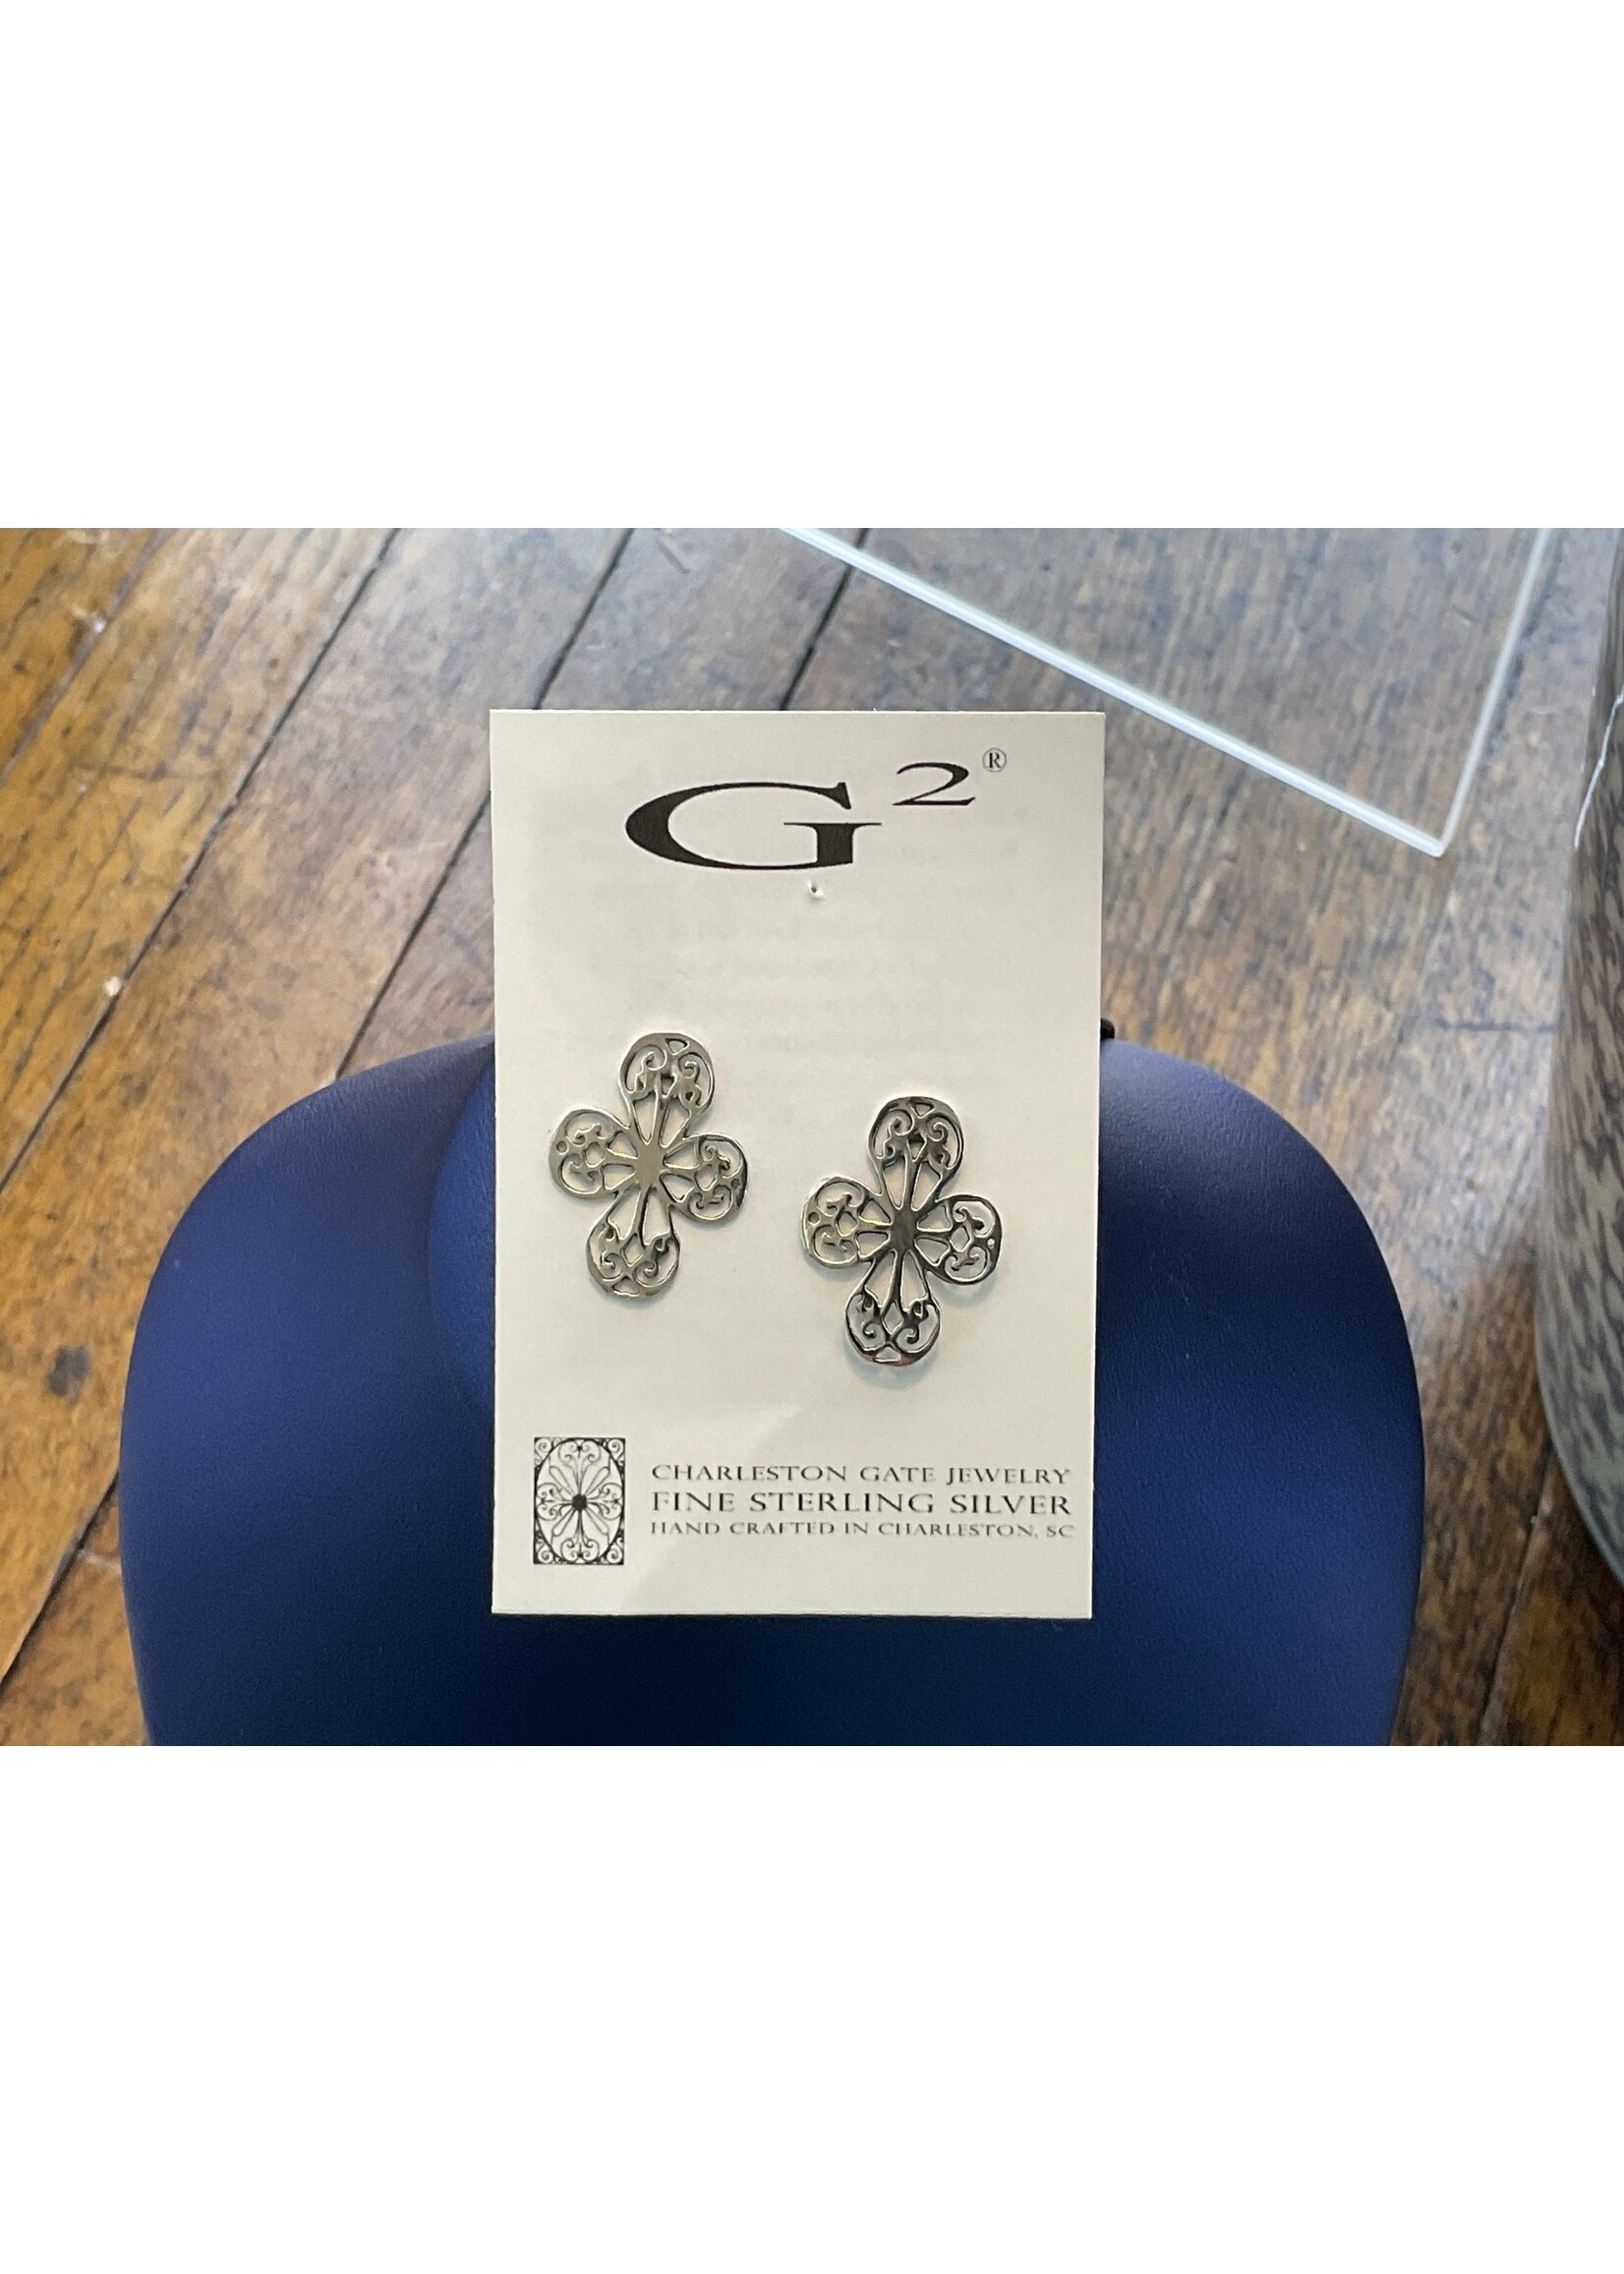 G2 Silver St. Philips Small Cross Post Earring